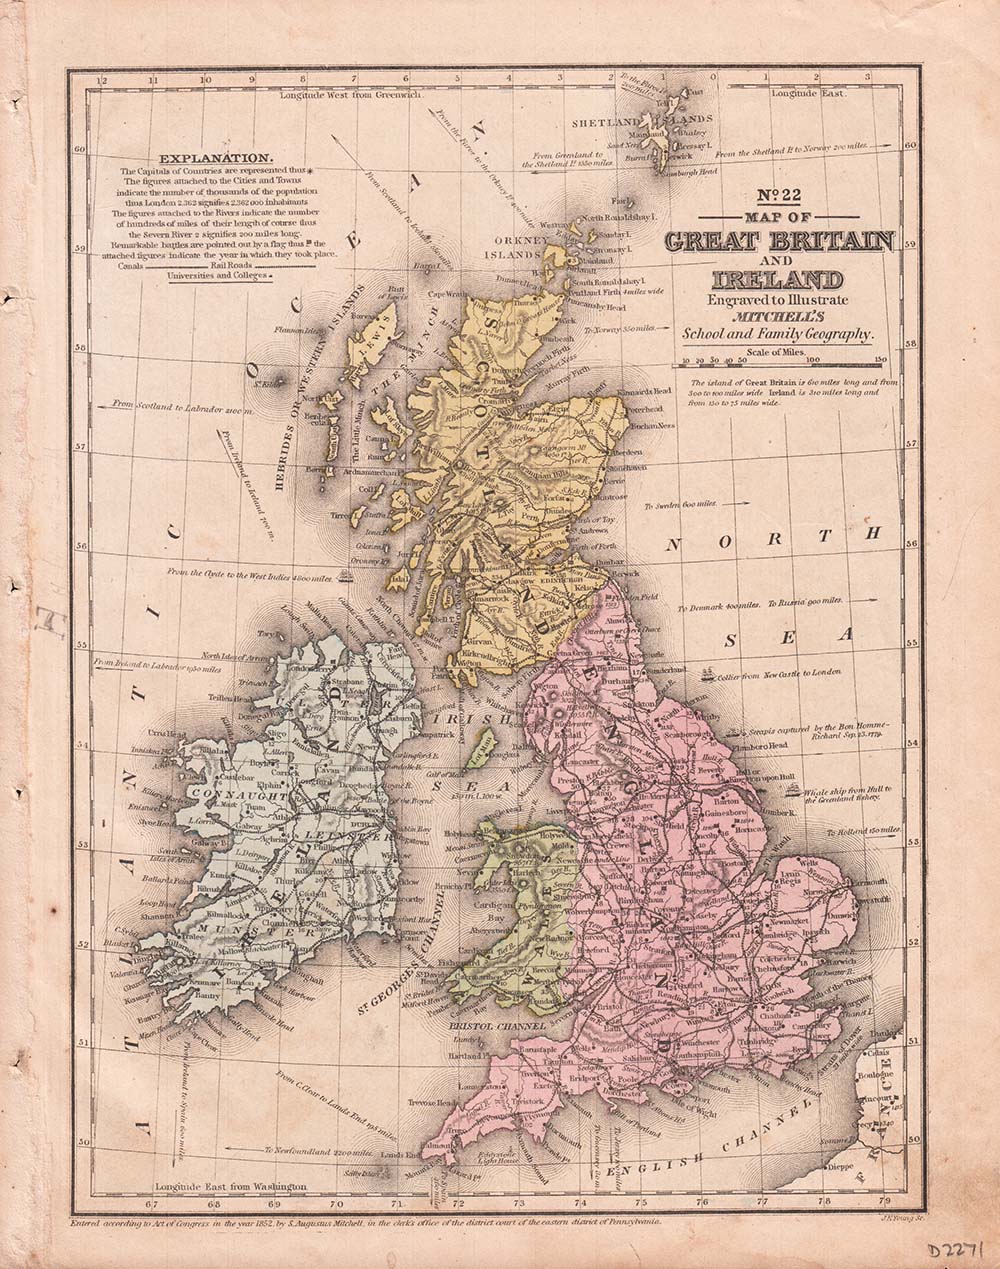 Map of Great Britain and Ireland Engraved to Illustrate Mitchell's School and Family Geography.